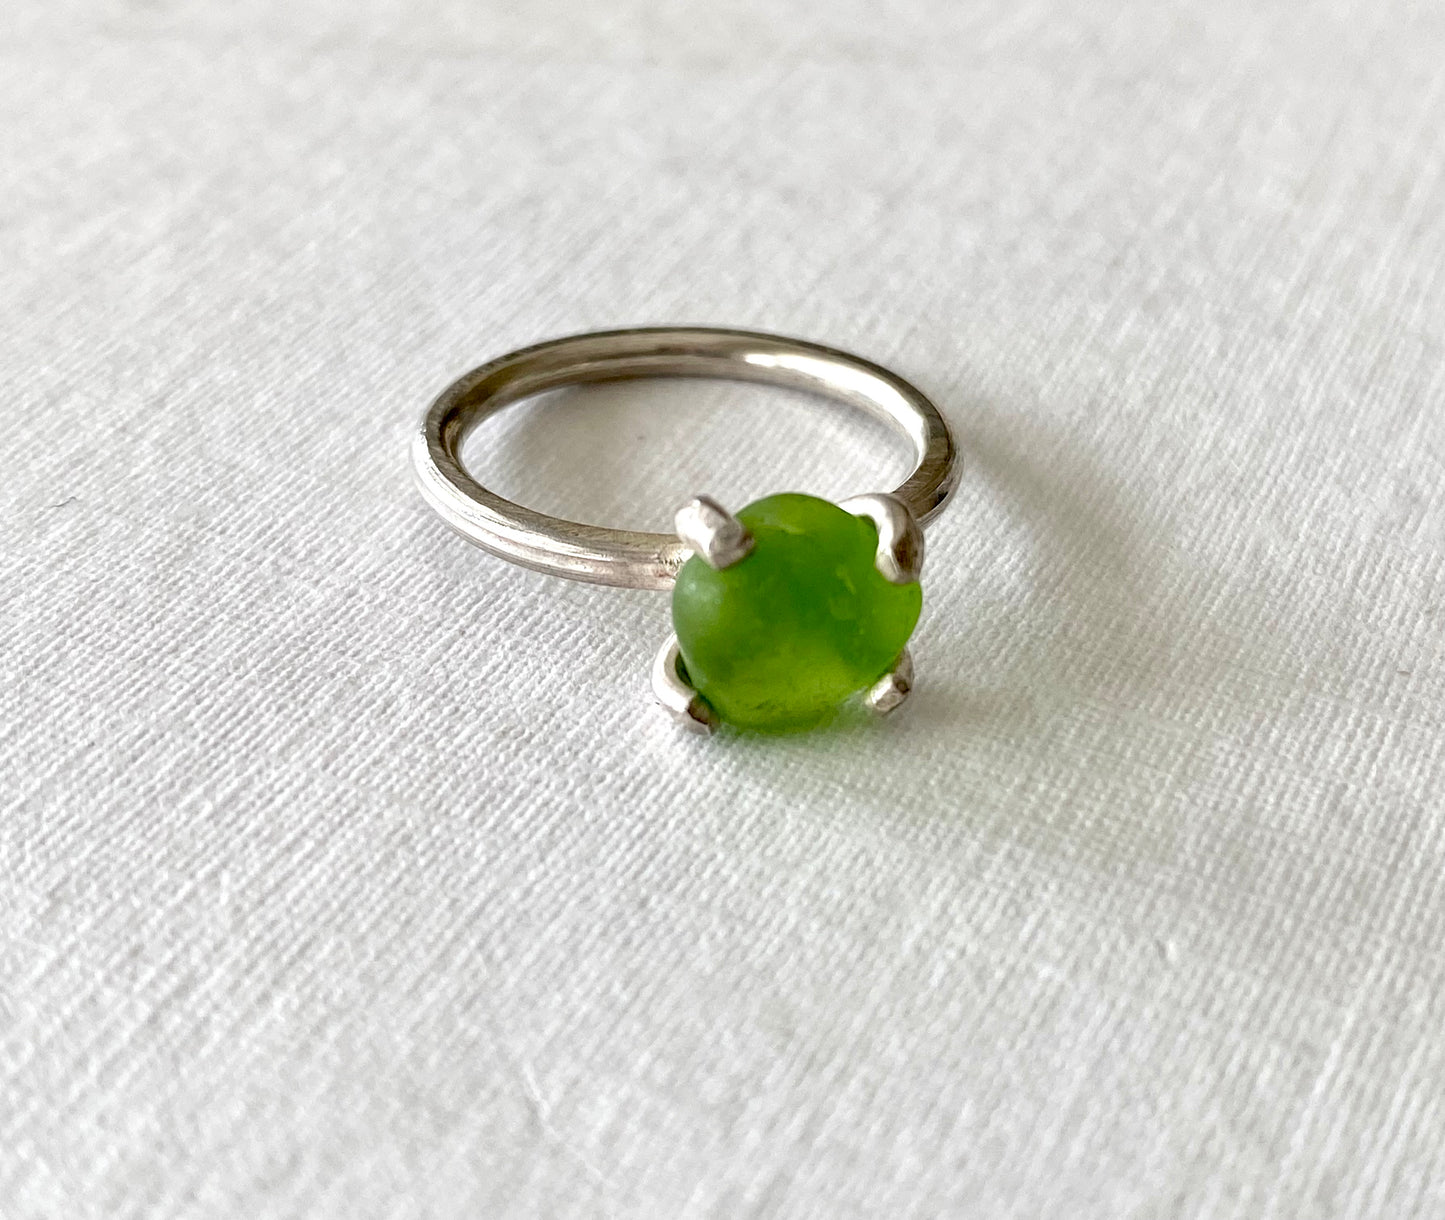 Close-up of a handmade ring with a vibrant green sea glass nugget set in a sterling silver band